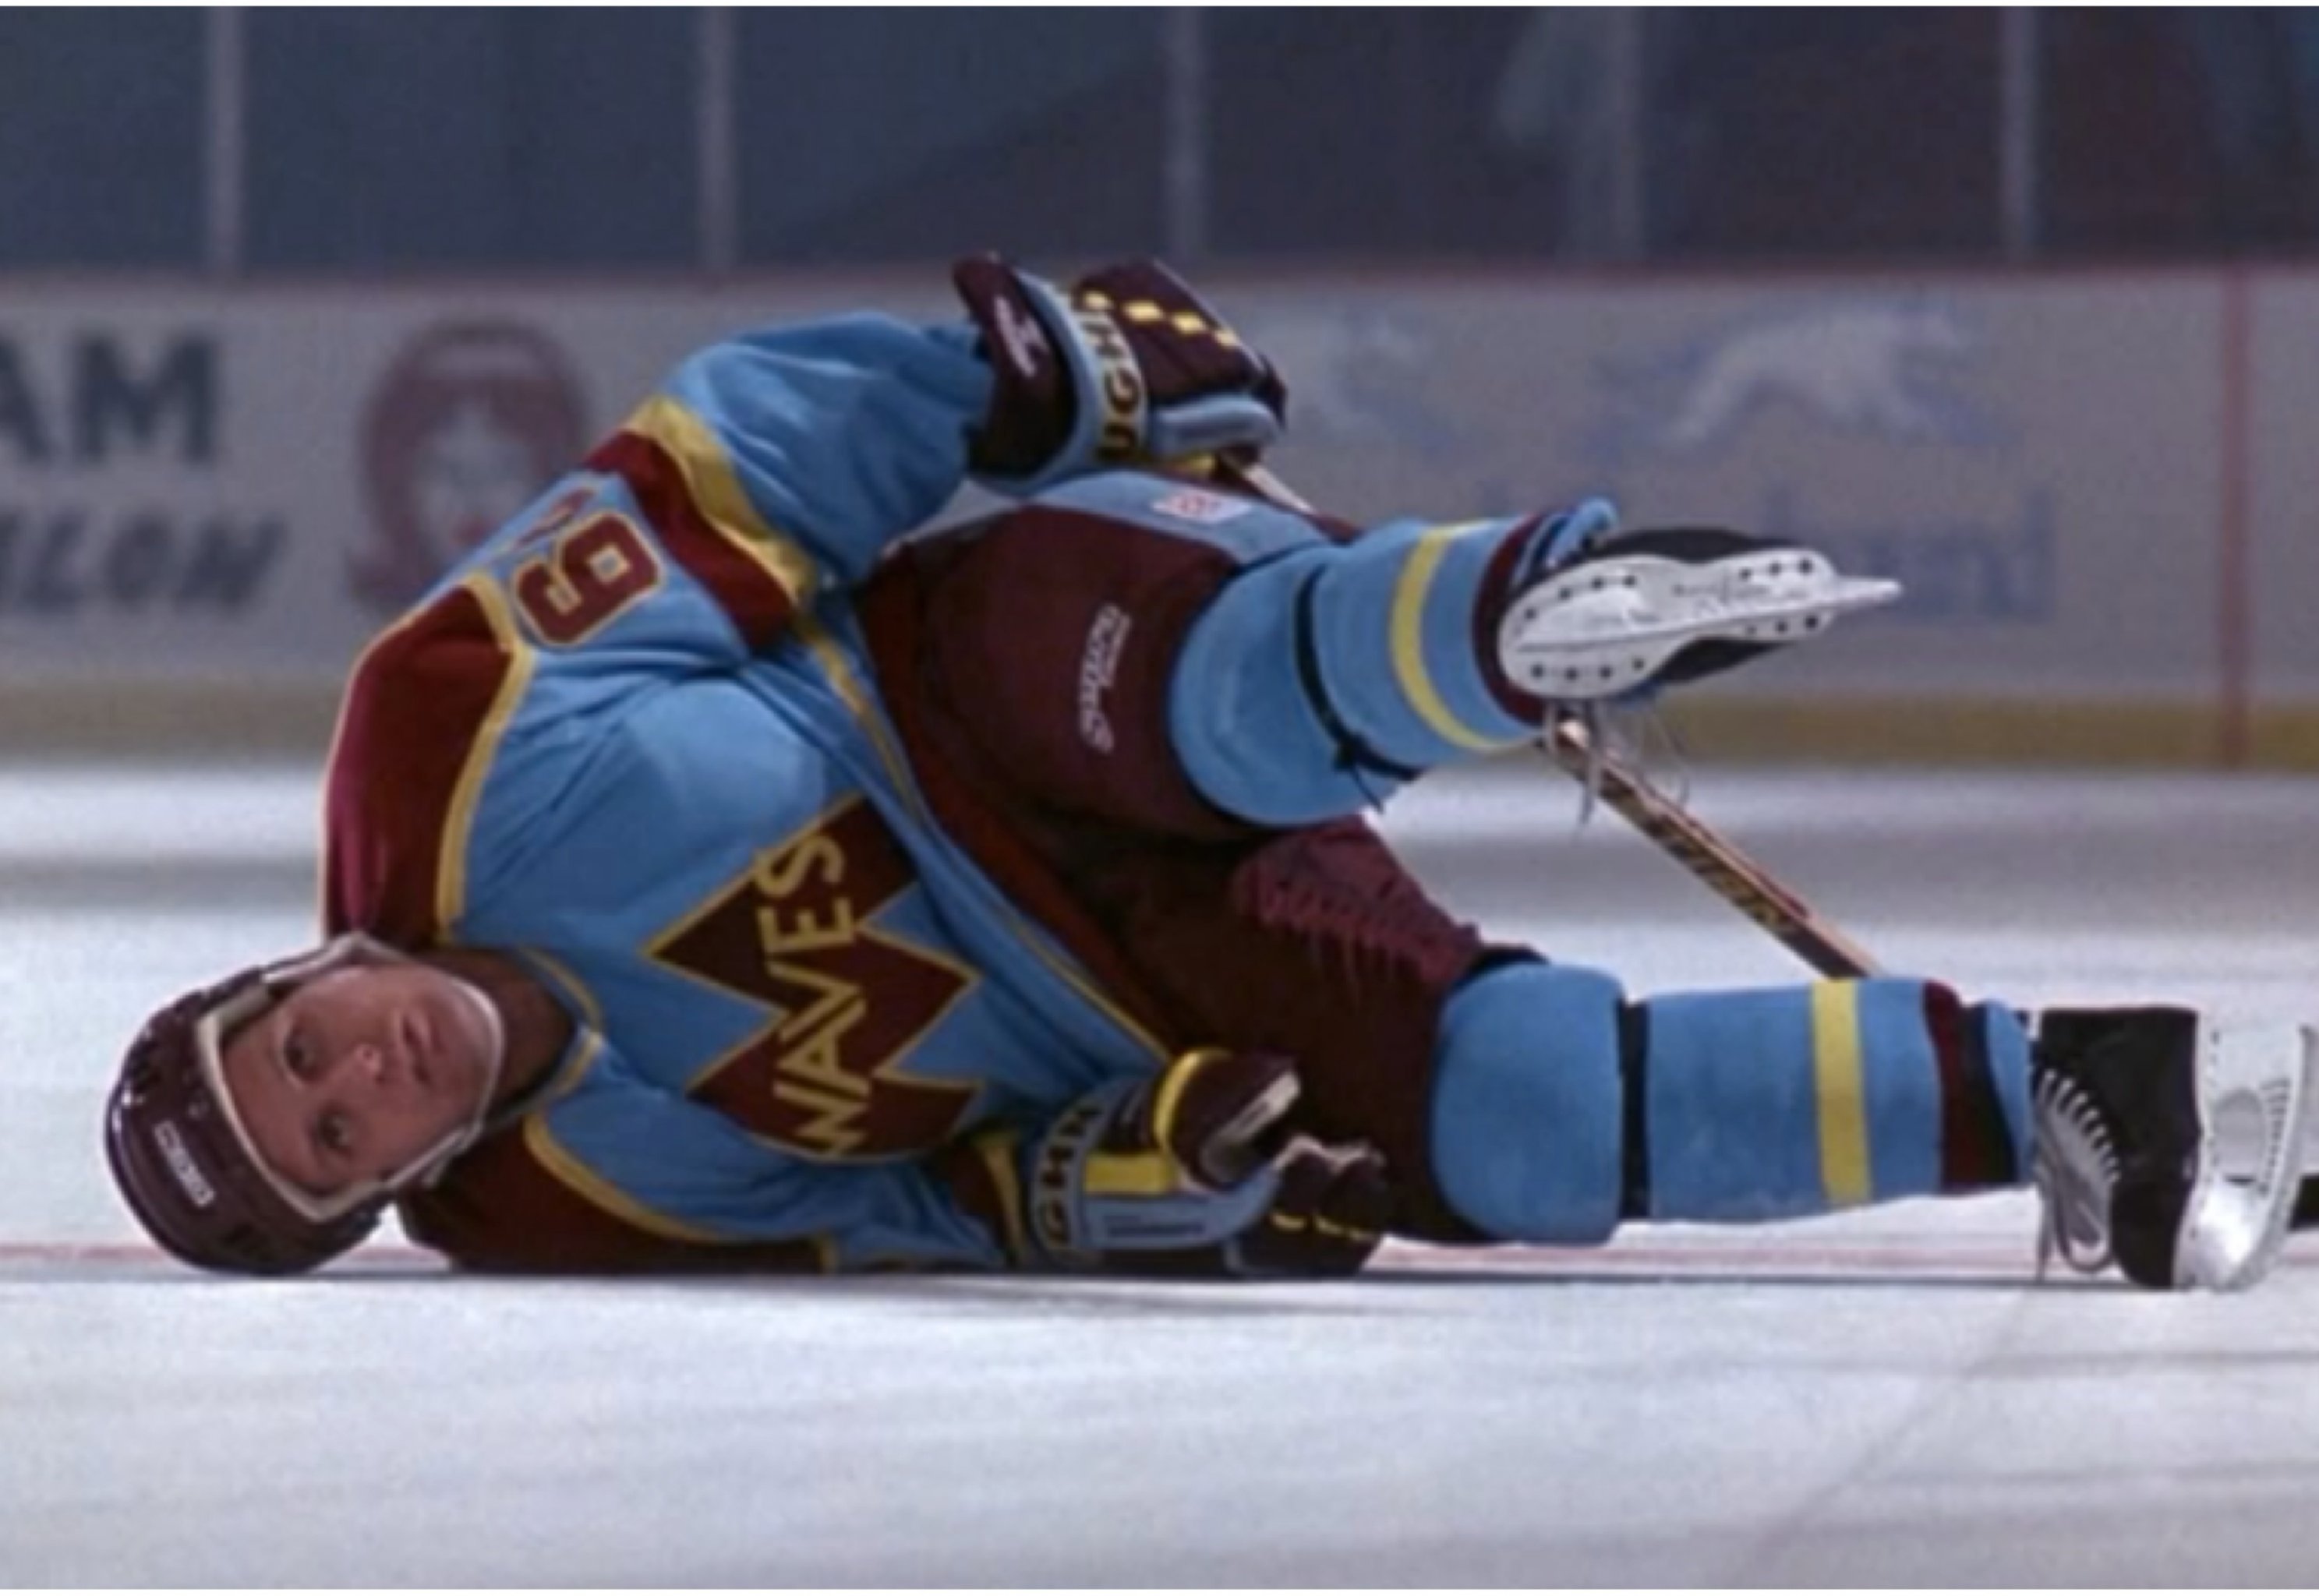 D2: The Mighty Ducks (1994) - Does it hold up? - Royals Review